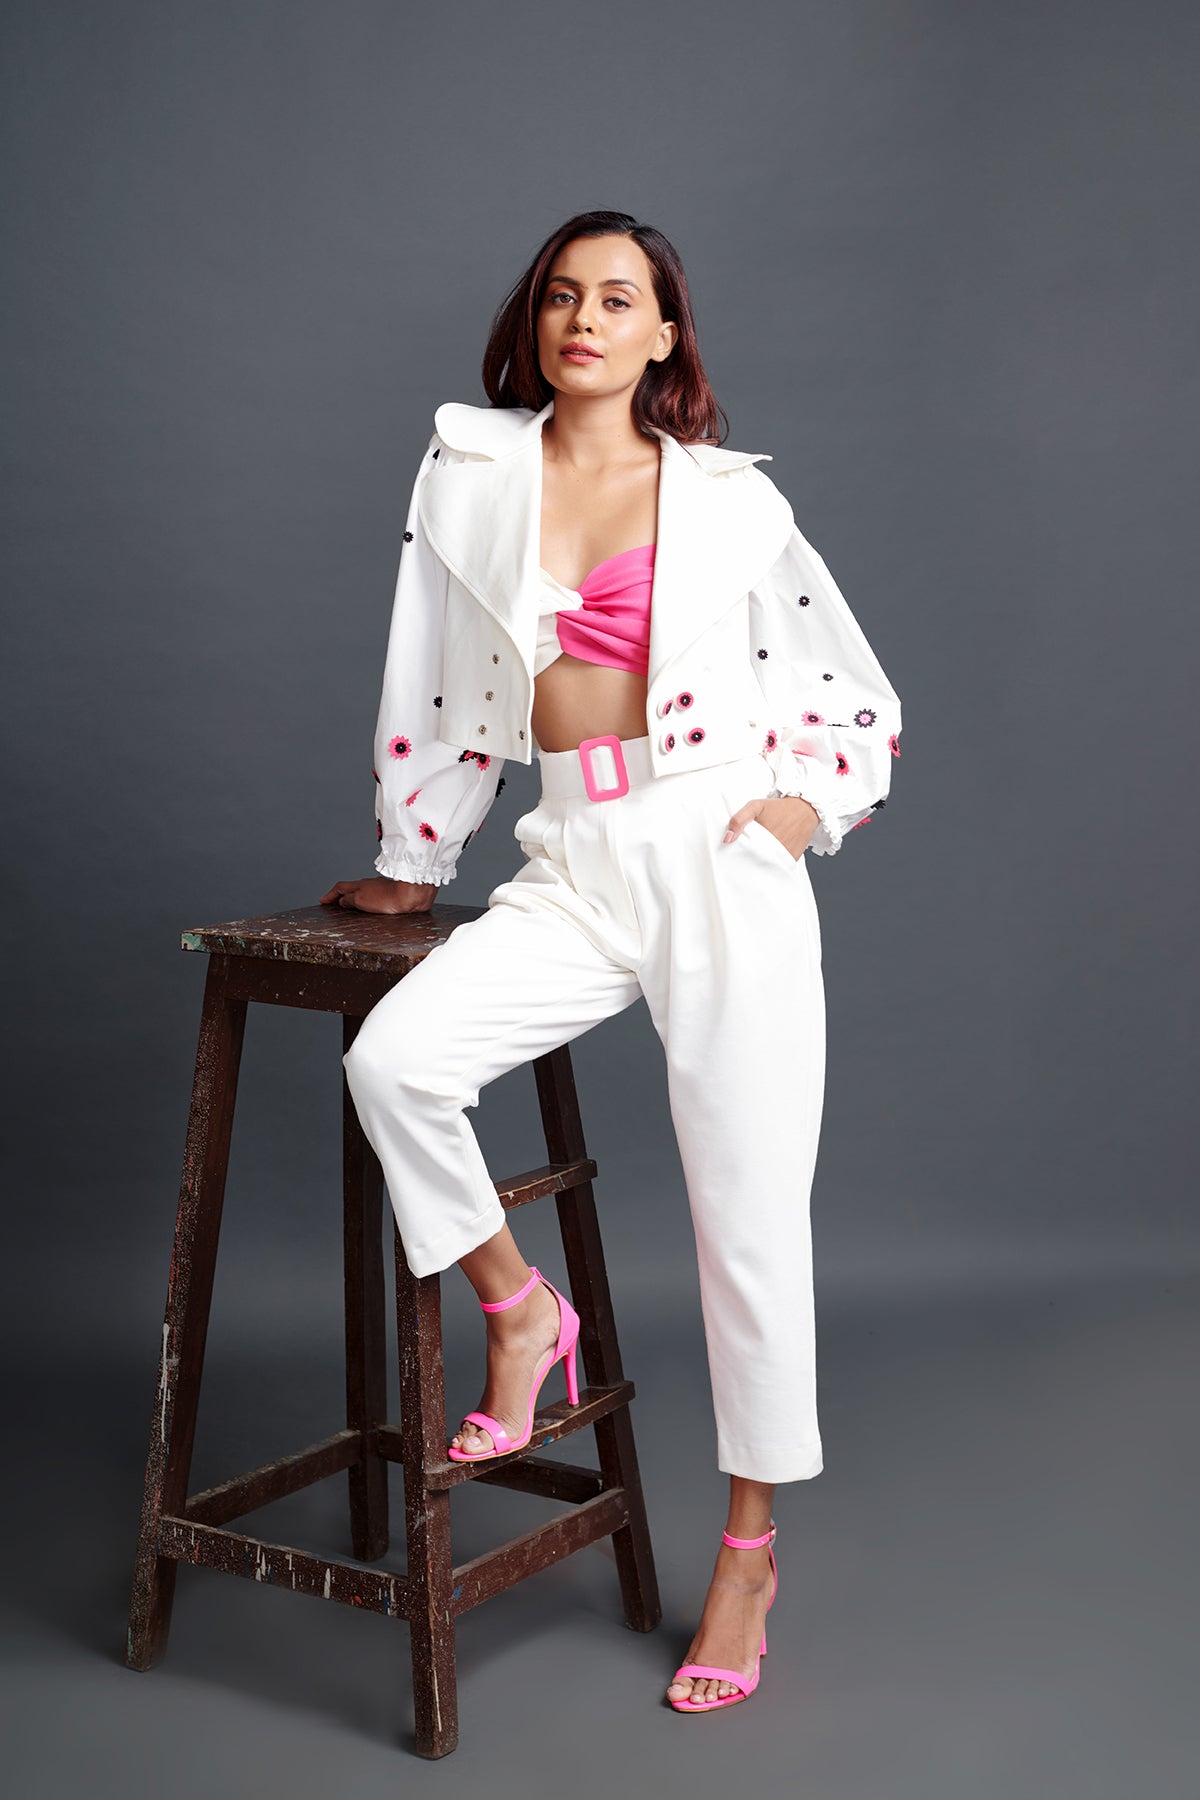 Image of WHITE CUT WORK DETAILED SLEEVED OVERLAP CROP JACKET AND PANTS. From savoirfashions.com